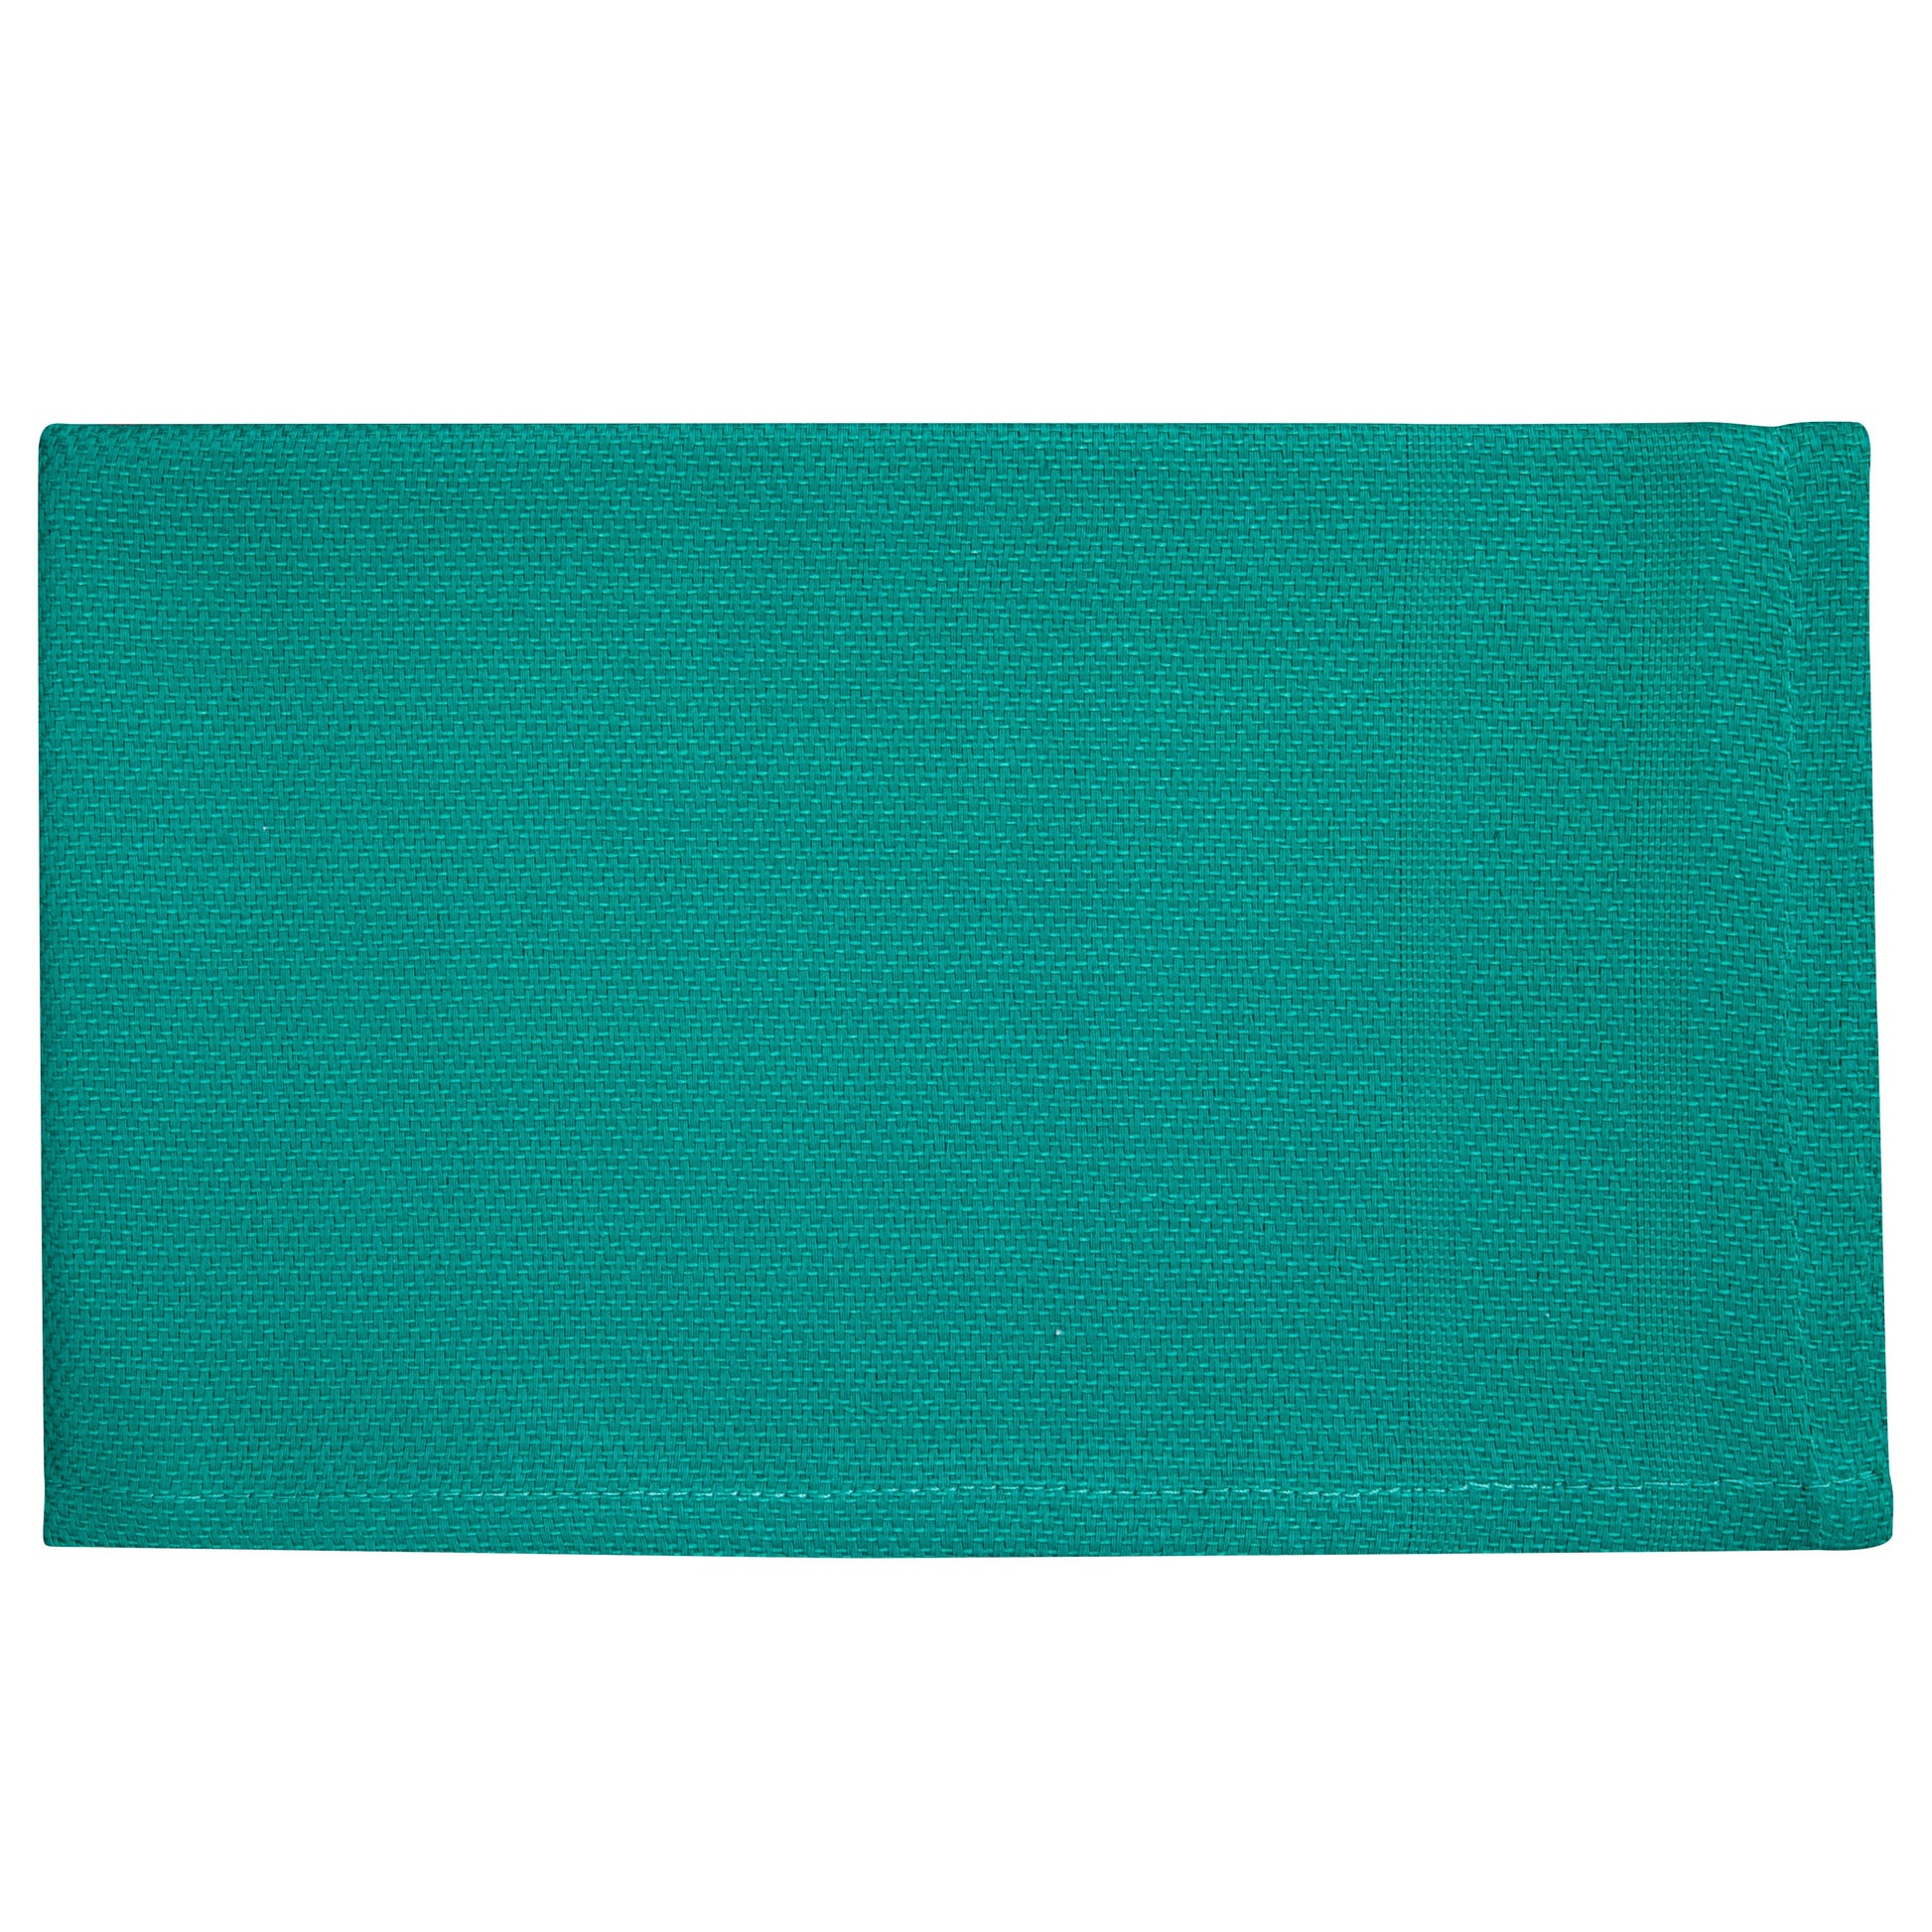 American Dawn | 18X33 Inch Jade Green With No Cam Healthcare Towel | Operating Room Towel